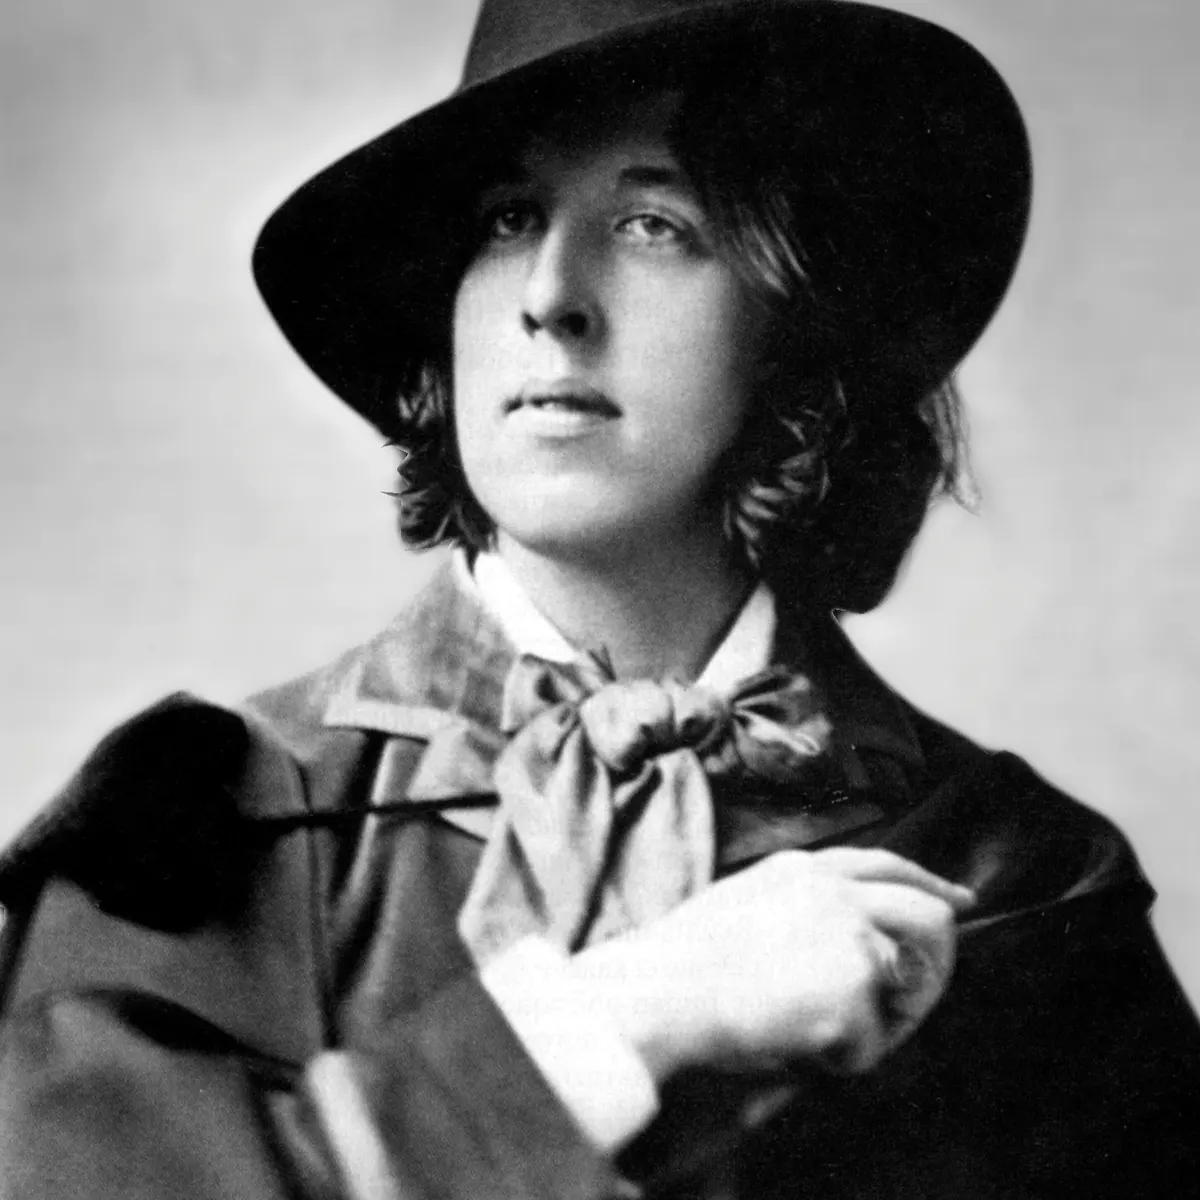   Black and white image of Oscar Wilde in a fedora and scarf.